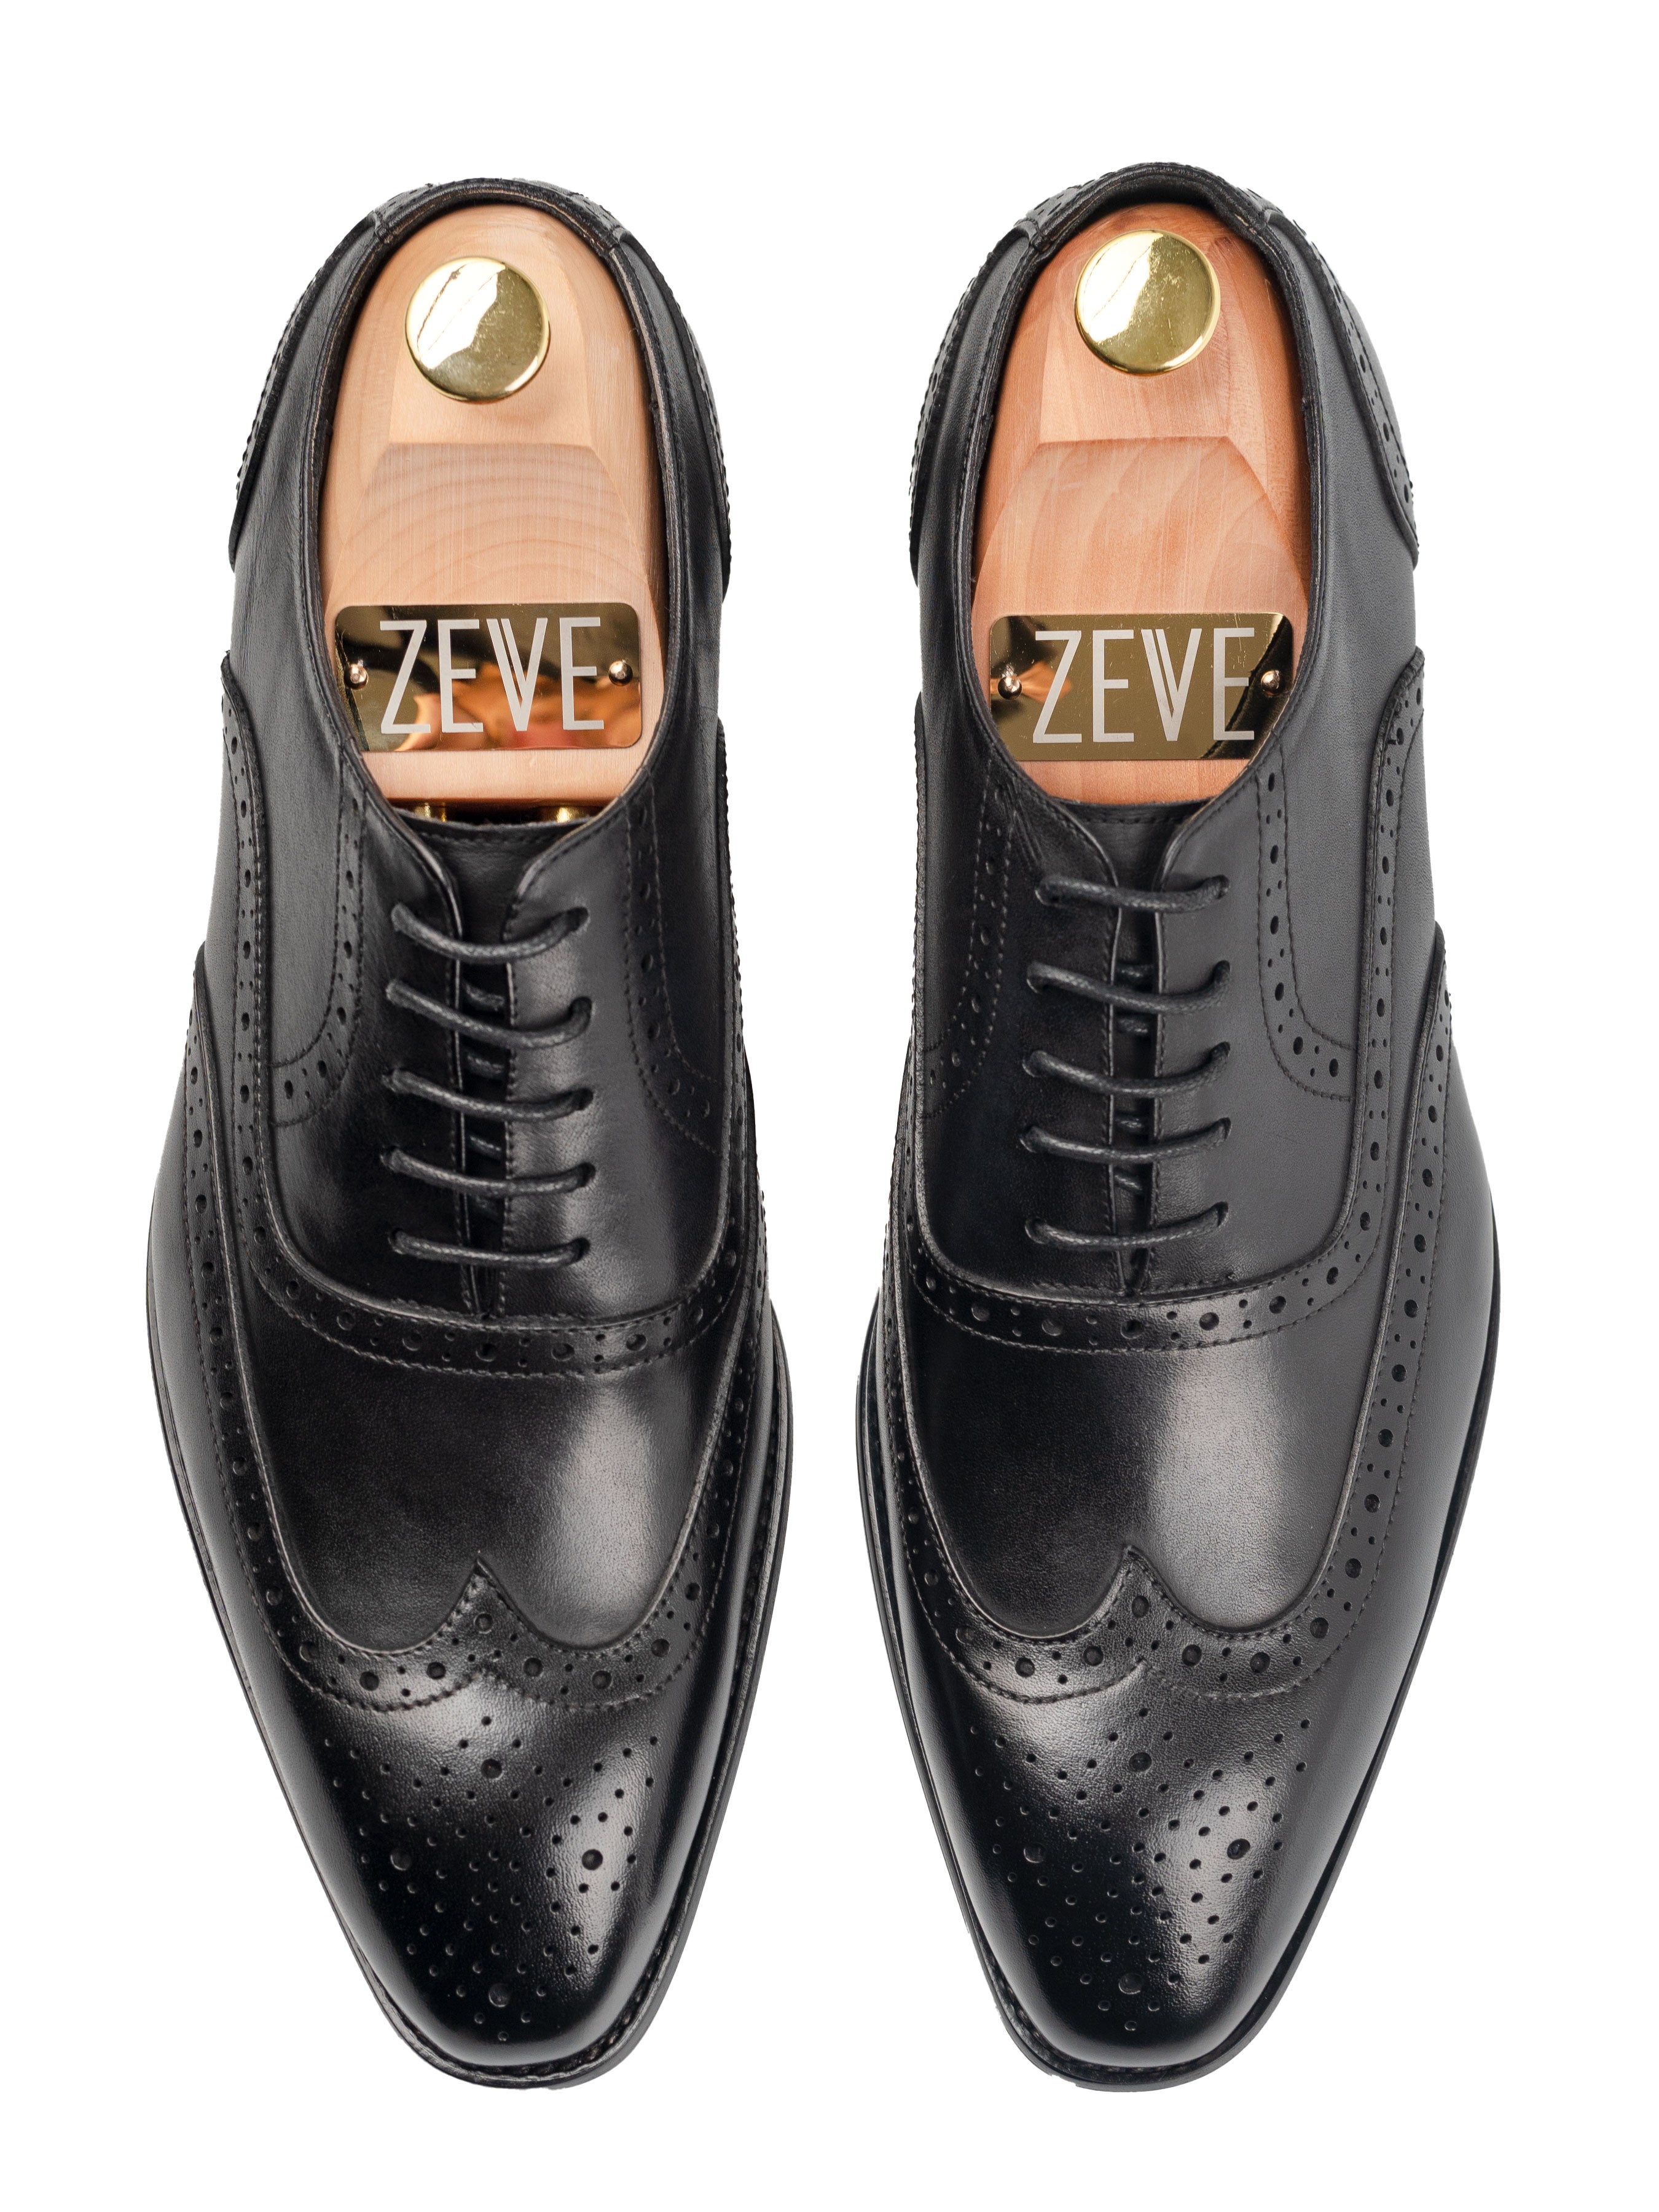 Oxford Brogue Wingtip - Black Lace Up (Chisel Toe)